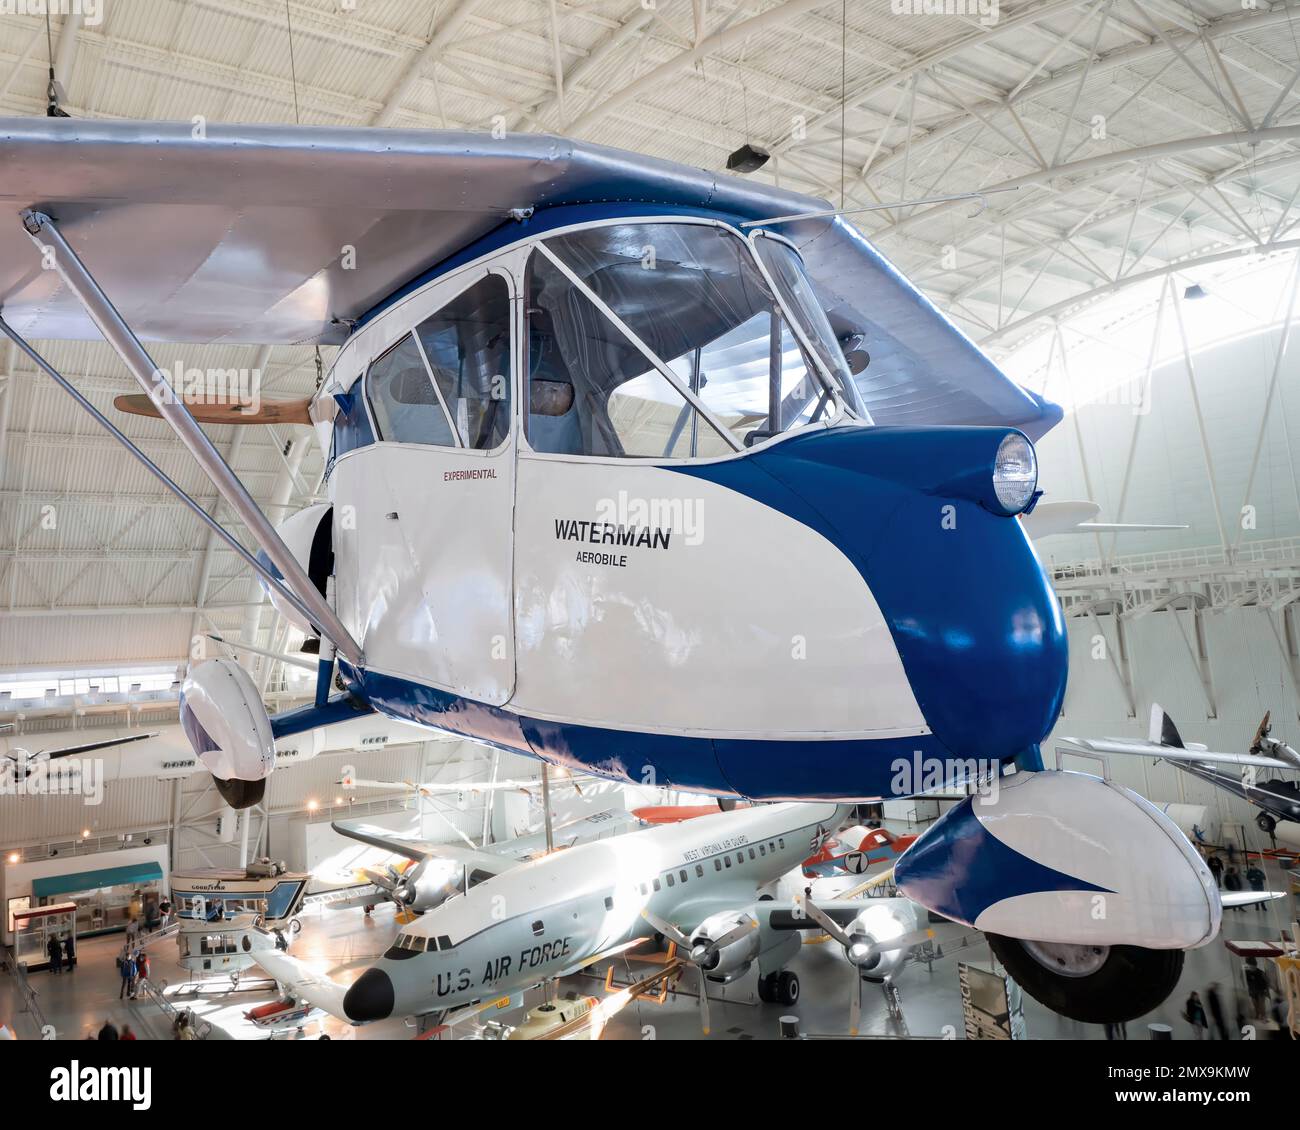 Waterman Aerobile #6 (1937) in Steven F. Udvar-Hazy Center of Smithsonian National Air and Space Museum, Chantilly, Virginia, USA Foto Stock